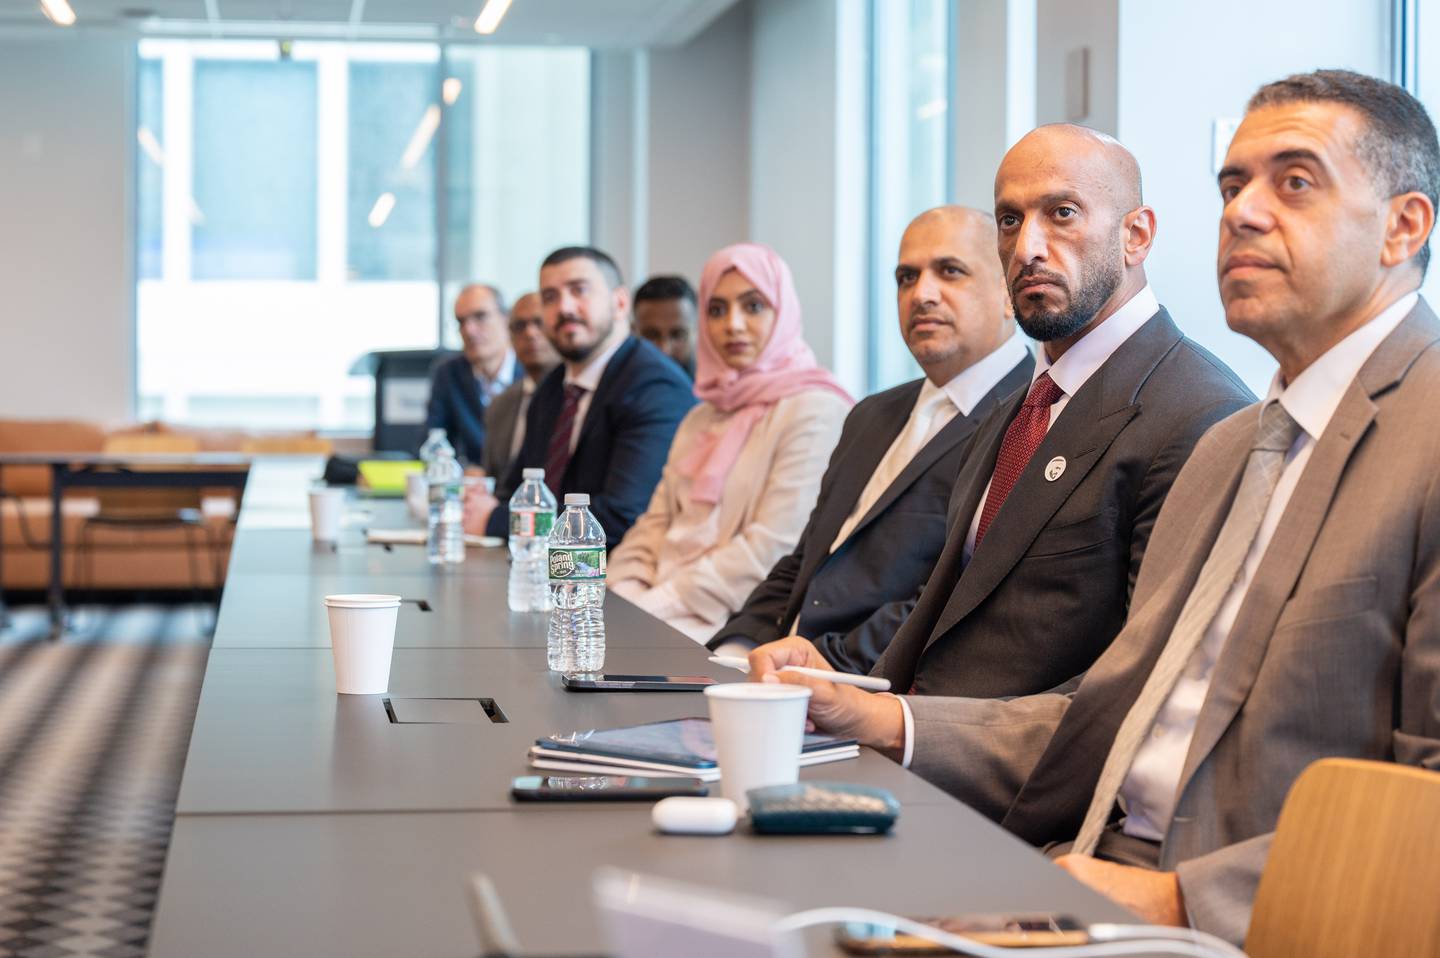 A delegation from the Department of Health Abu Dhabi, led by chairman Sheikh Abdulla bin Mohammed Al Hamed, visited MassBio in Boston, an industry trade association in life sciences.